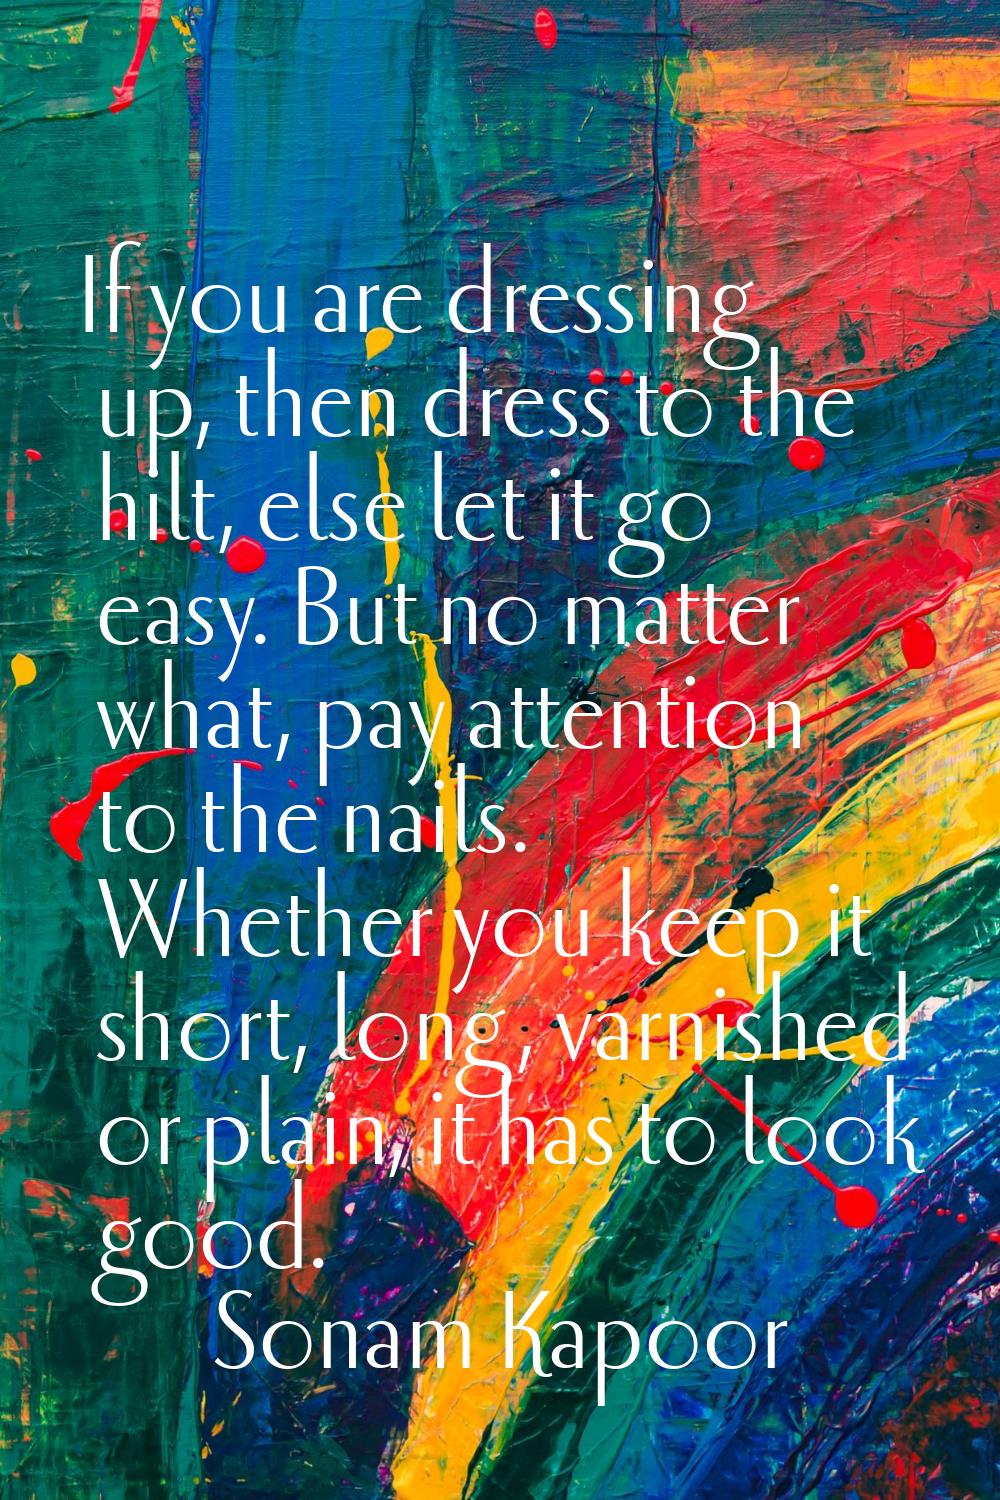 If you are dressing up, then dress to the hilt, else let it go easy. But no matter what, pay attent